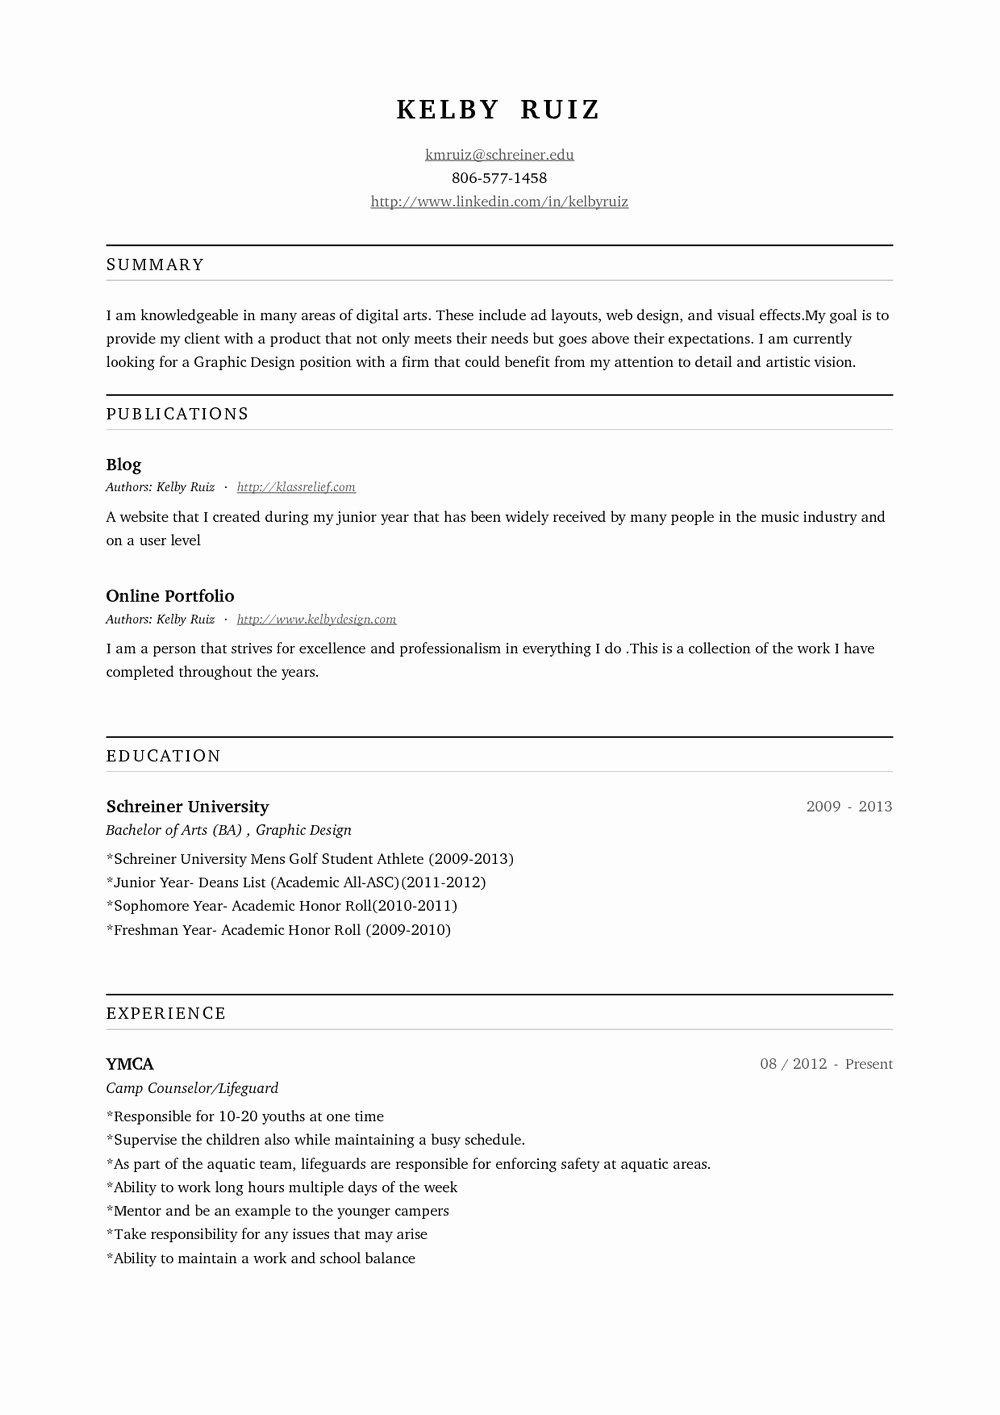 Top Rated Free Resume Builder